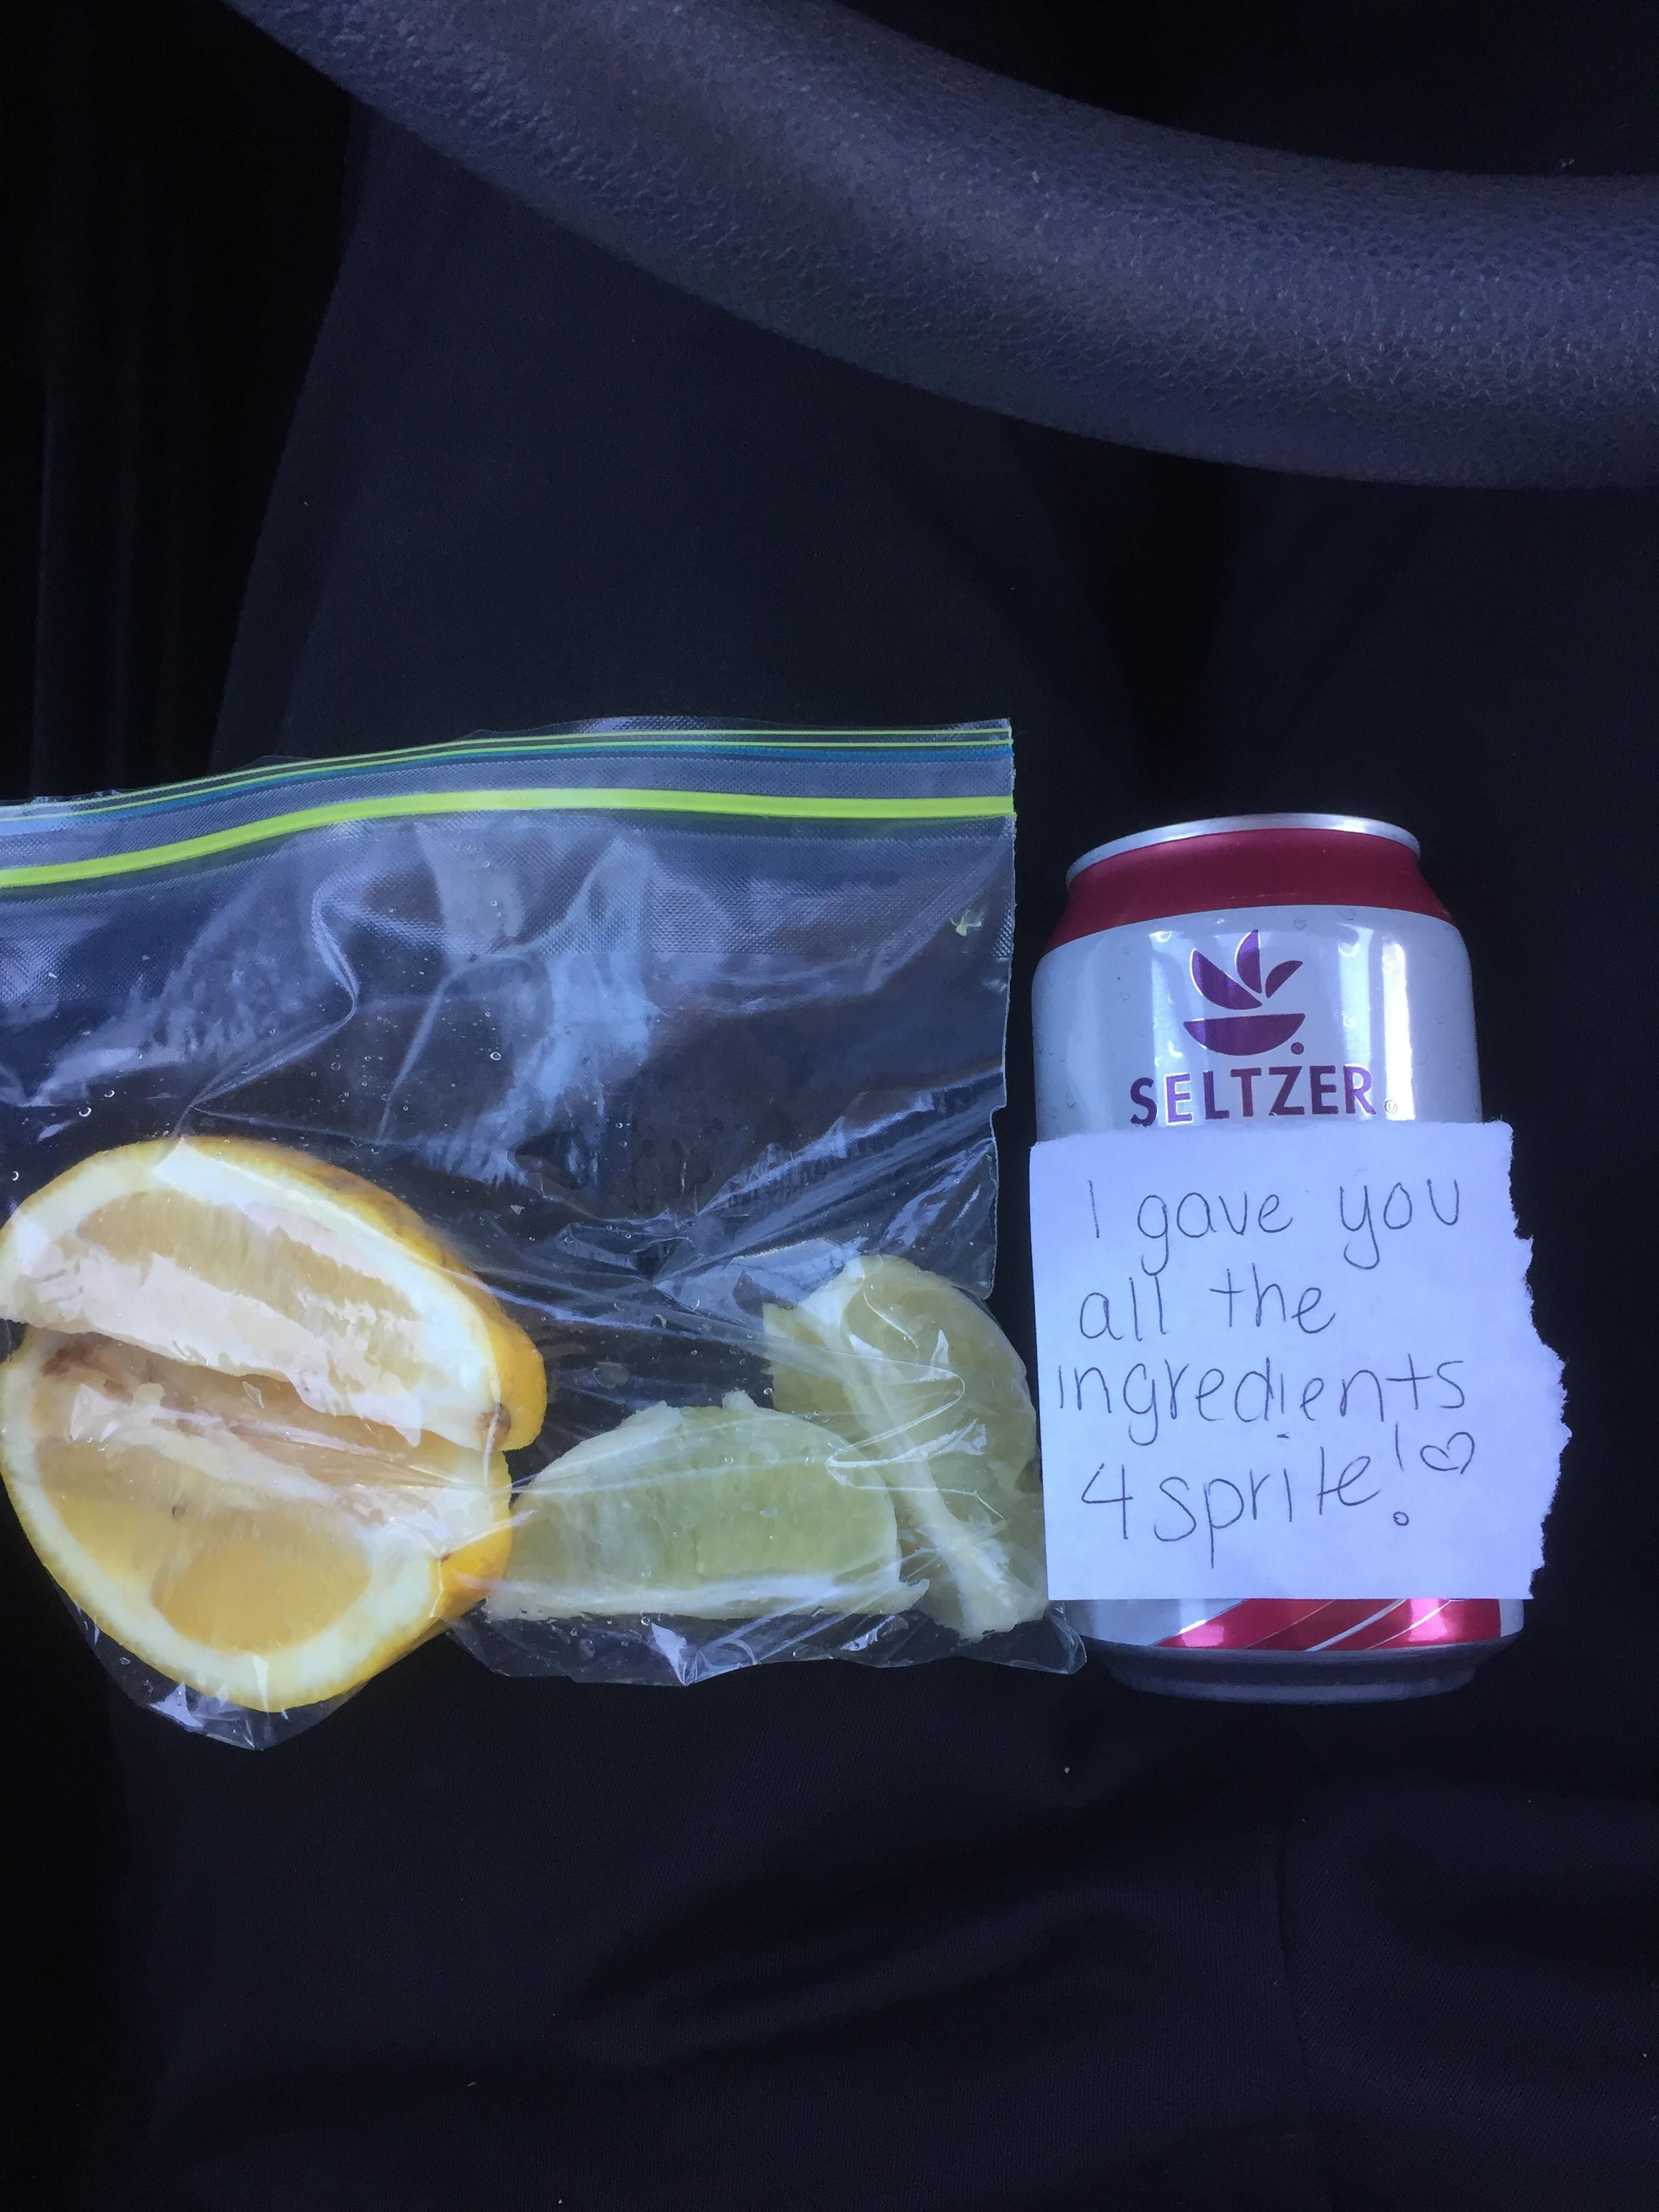 So my wife said she packed a special treat in my lunch today. Some assembly required.